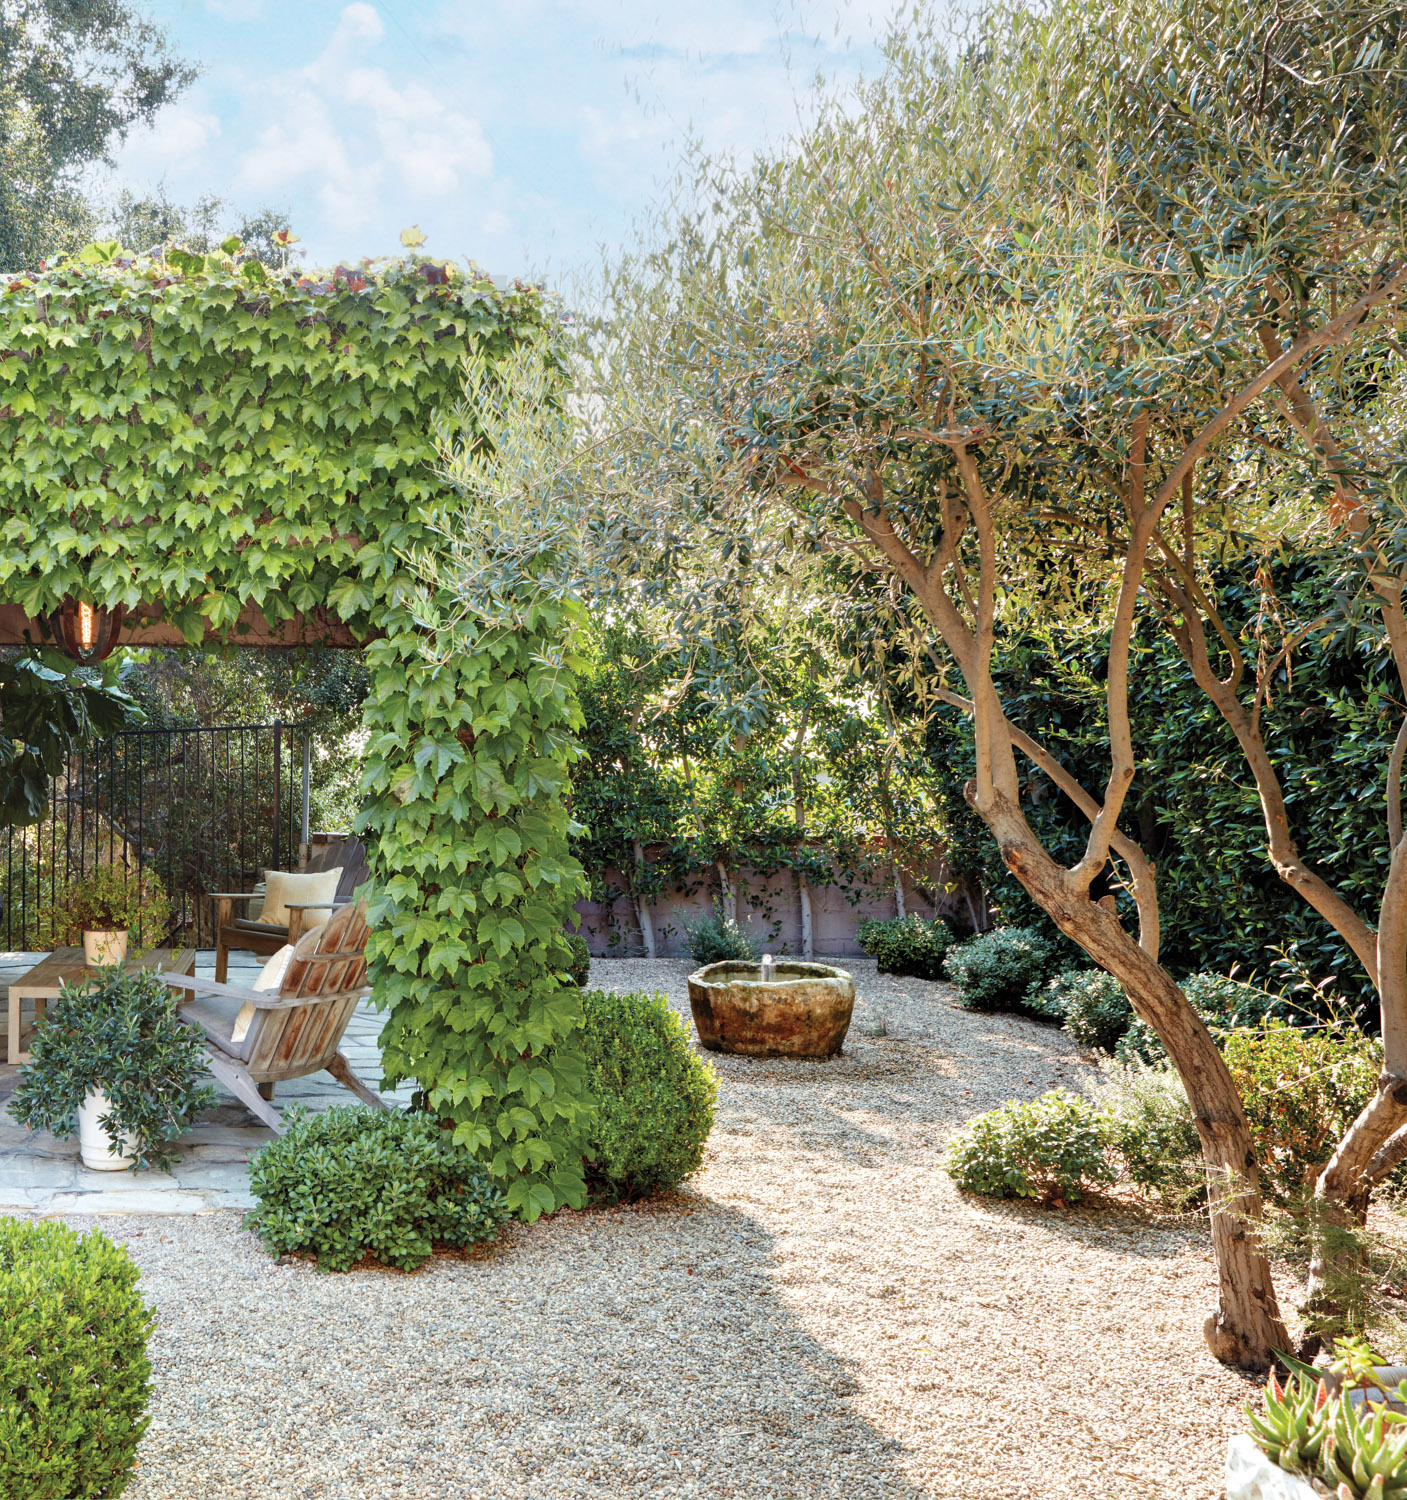 Lush backyard with pebbles, mature olive trees and climbing vines serve as garden inspiration